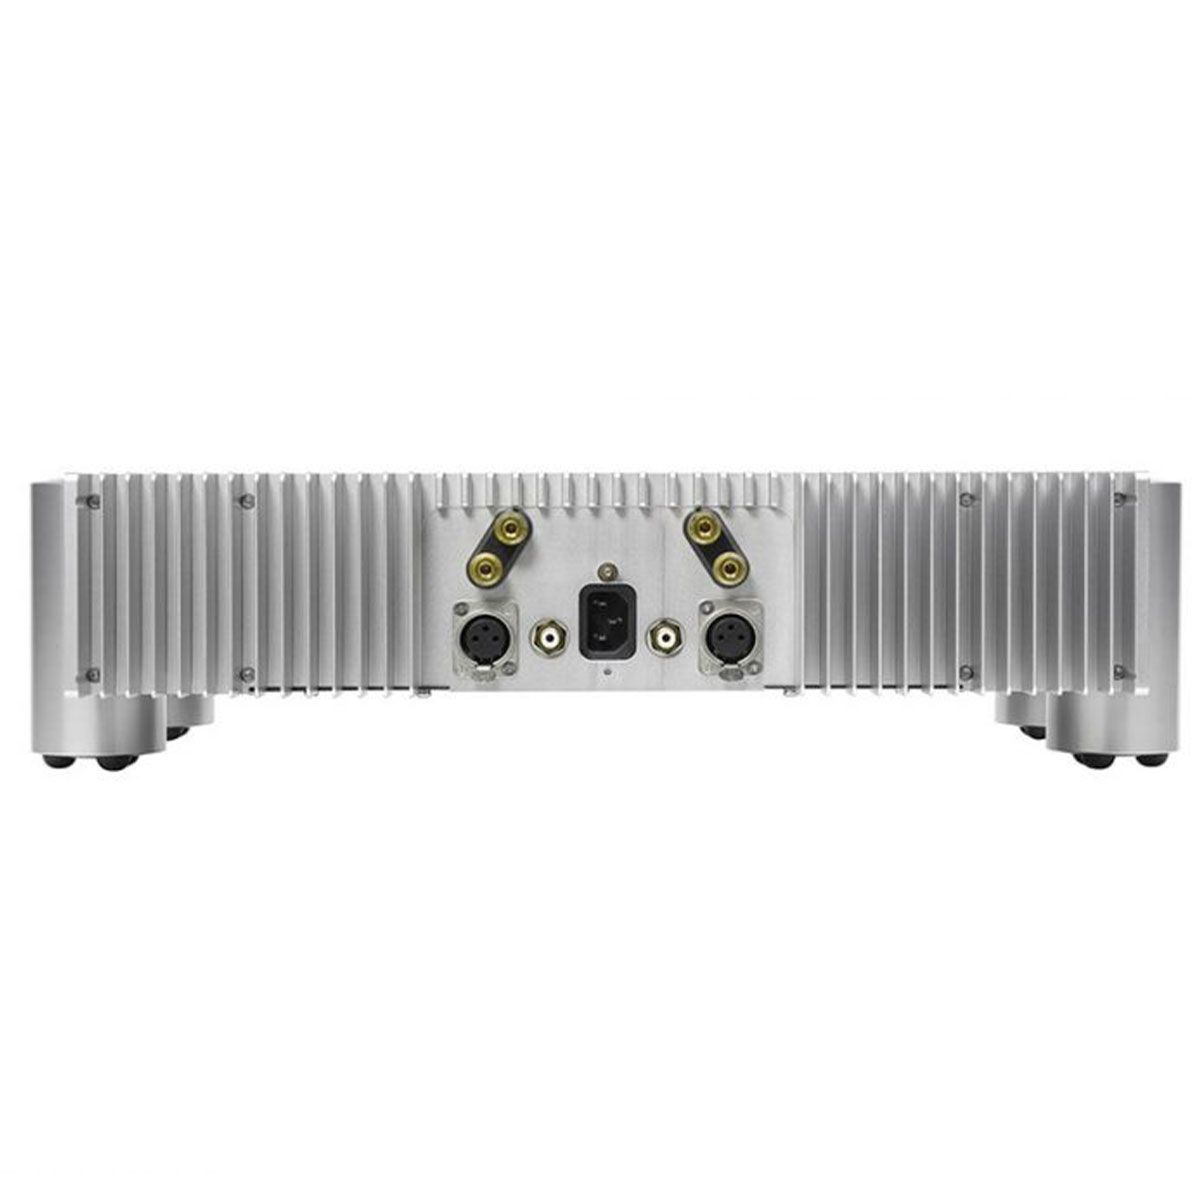 Rear view Chord Electronics SPM 650 130W Signature Power Amplifier - SILVER